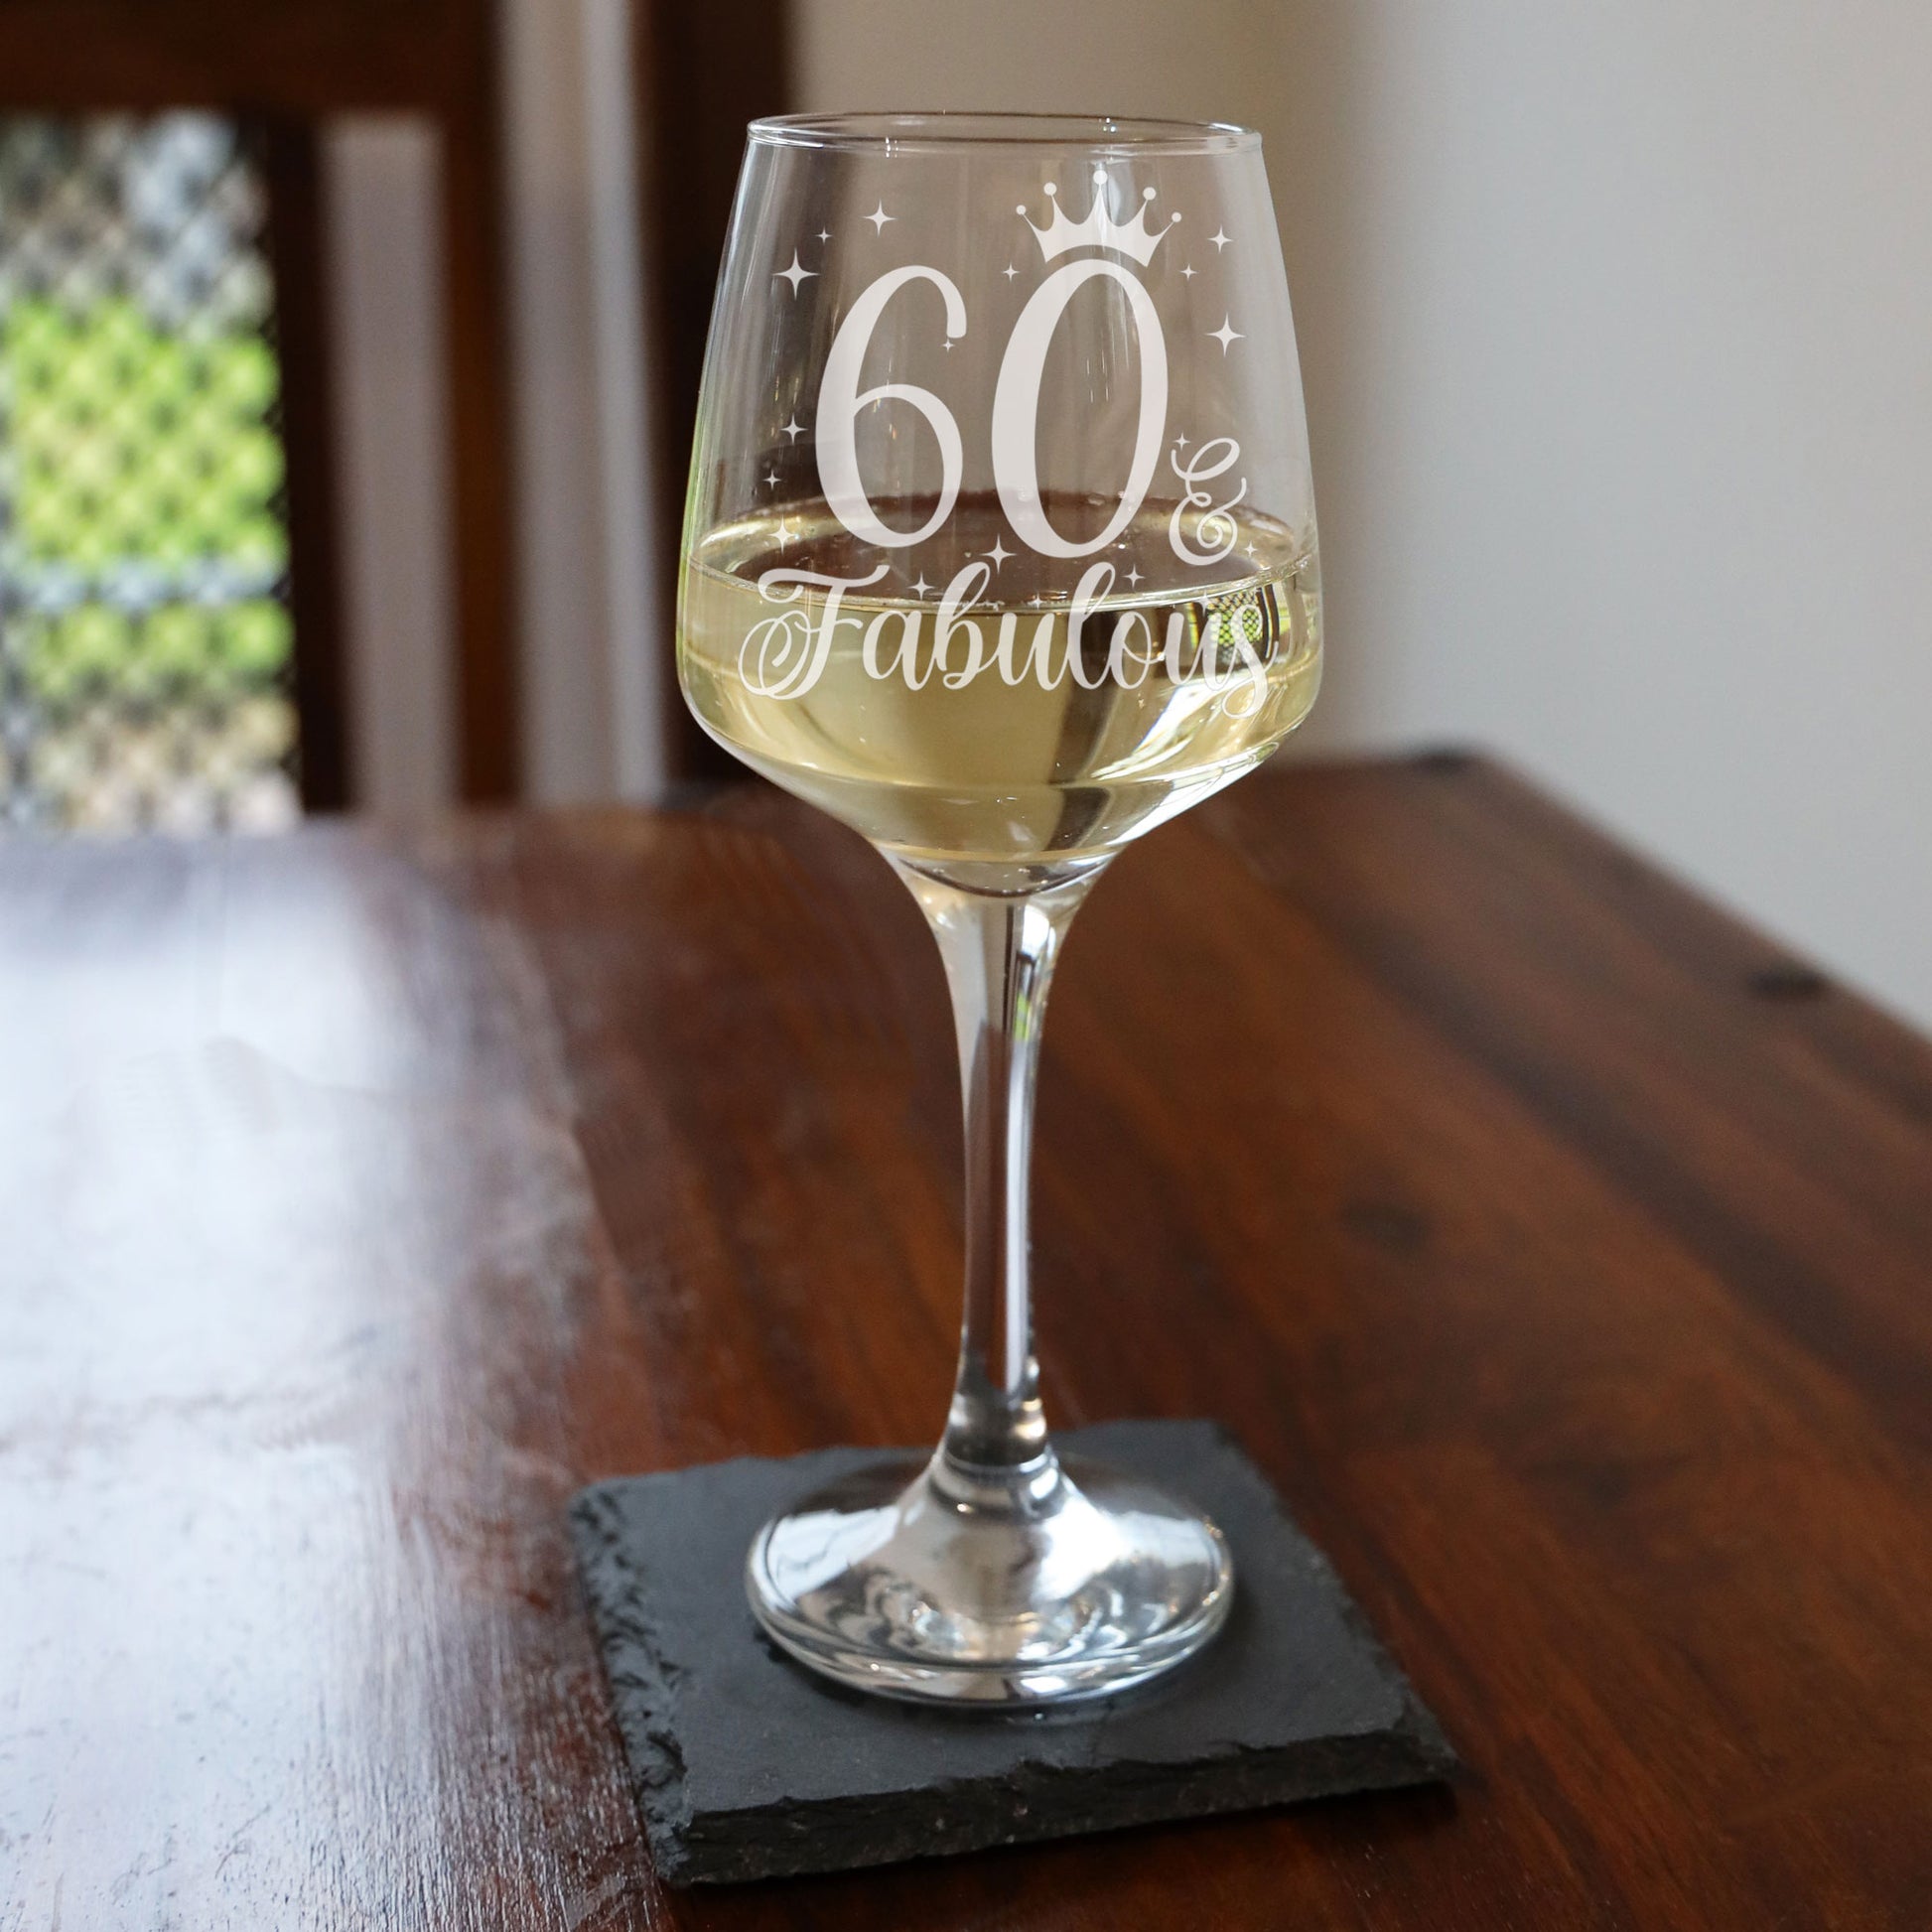 60 & Fabulous 60th Birthday Gift Engraved Wine Glass and/or Coaster Set  - Always Looking Good - Wine Glass Only  